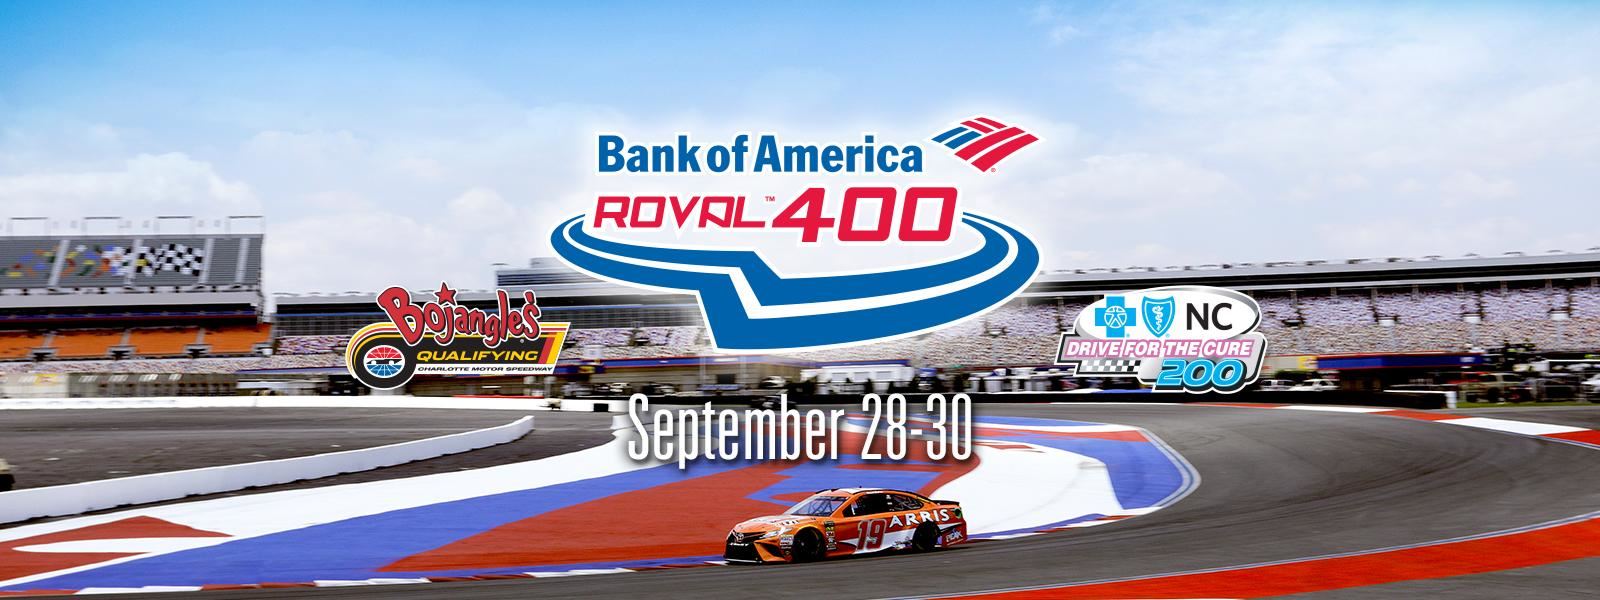 Win Tickets to the Bank of America ROVAL™ 400